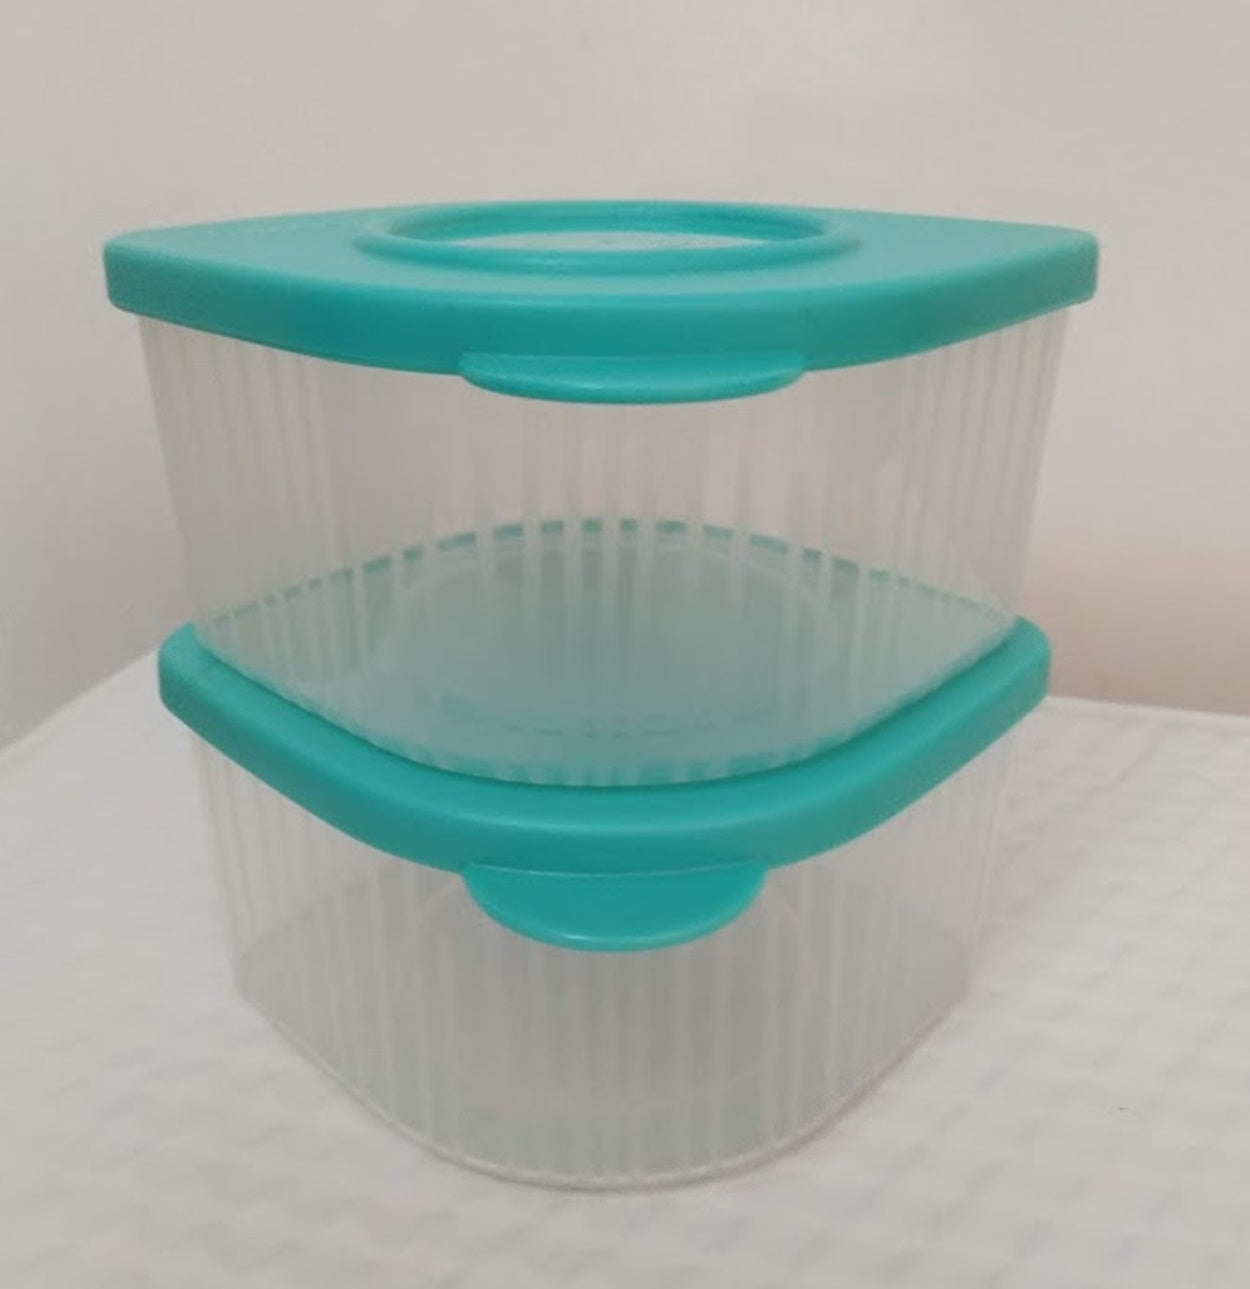 TUPPERWARE TWO 2-cup Sheer Fresh N Cool Square Round Storage Containers Keepers Aqua Teal - Plastic Glass and Wax